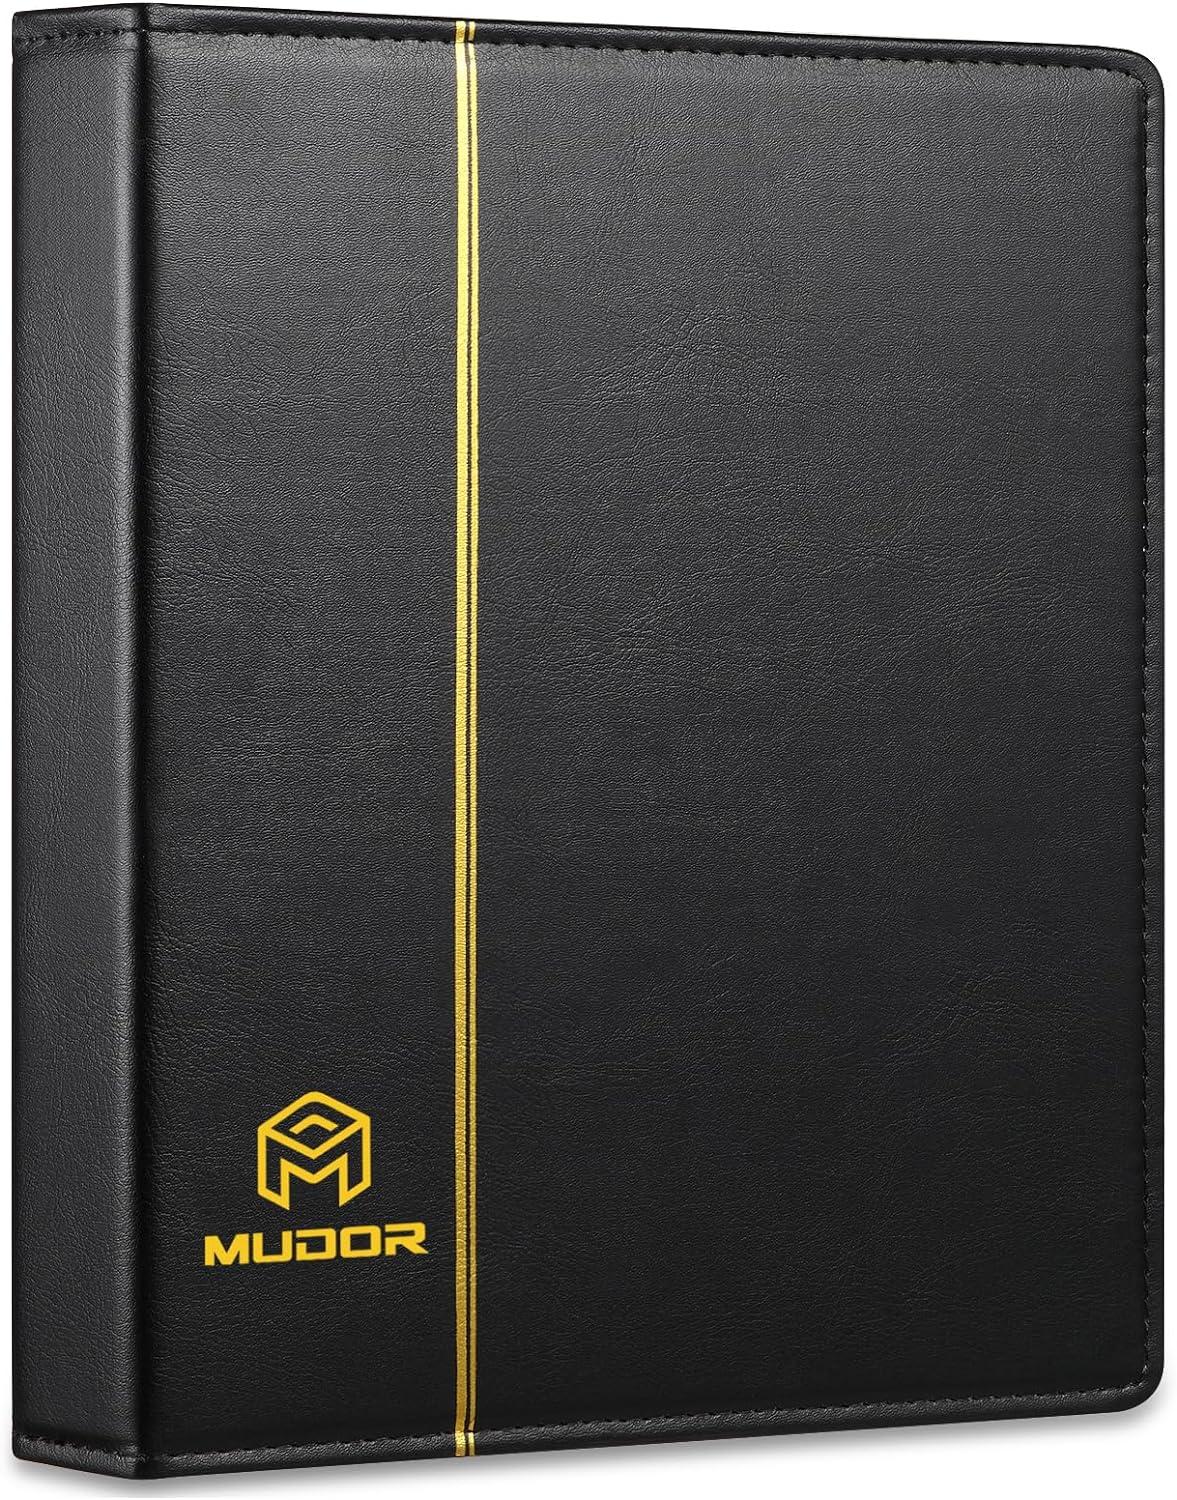 mudor empty premium pu classic binder 4 ring binder albums stockbook for stamps documents coins bank notes